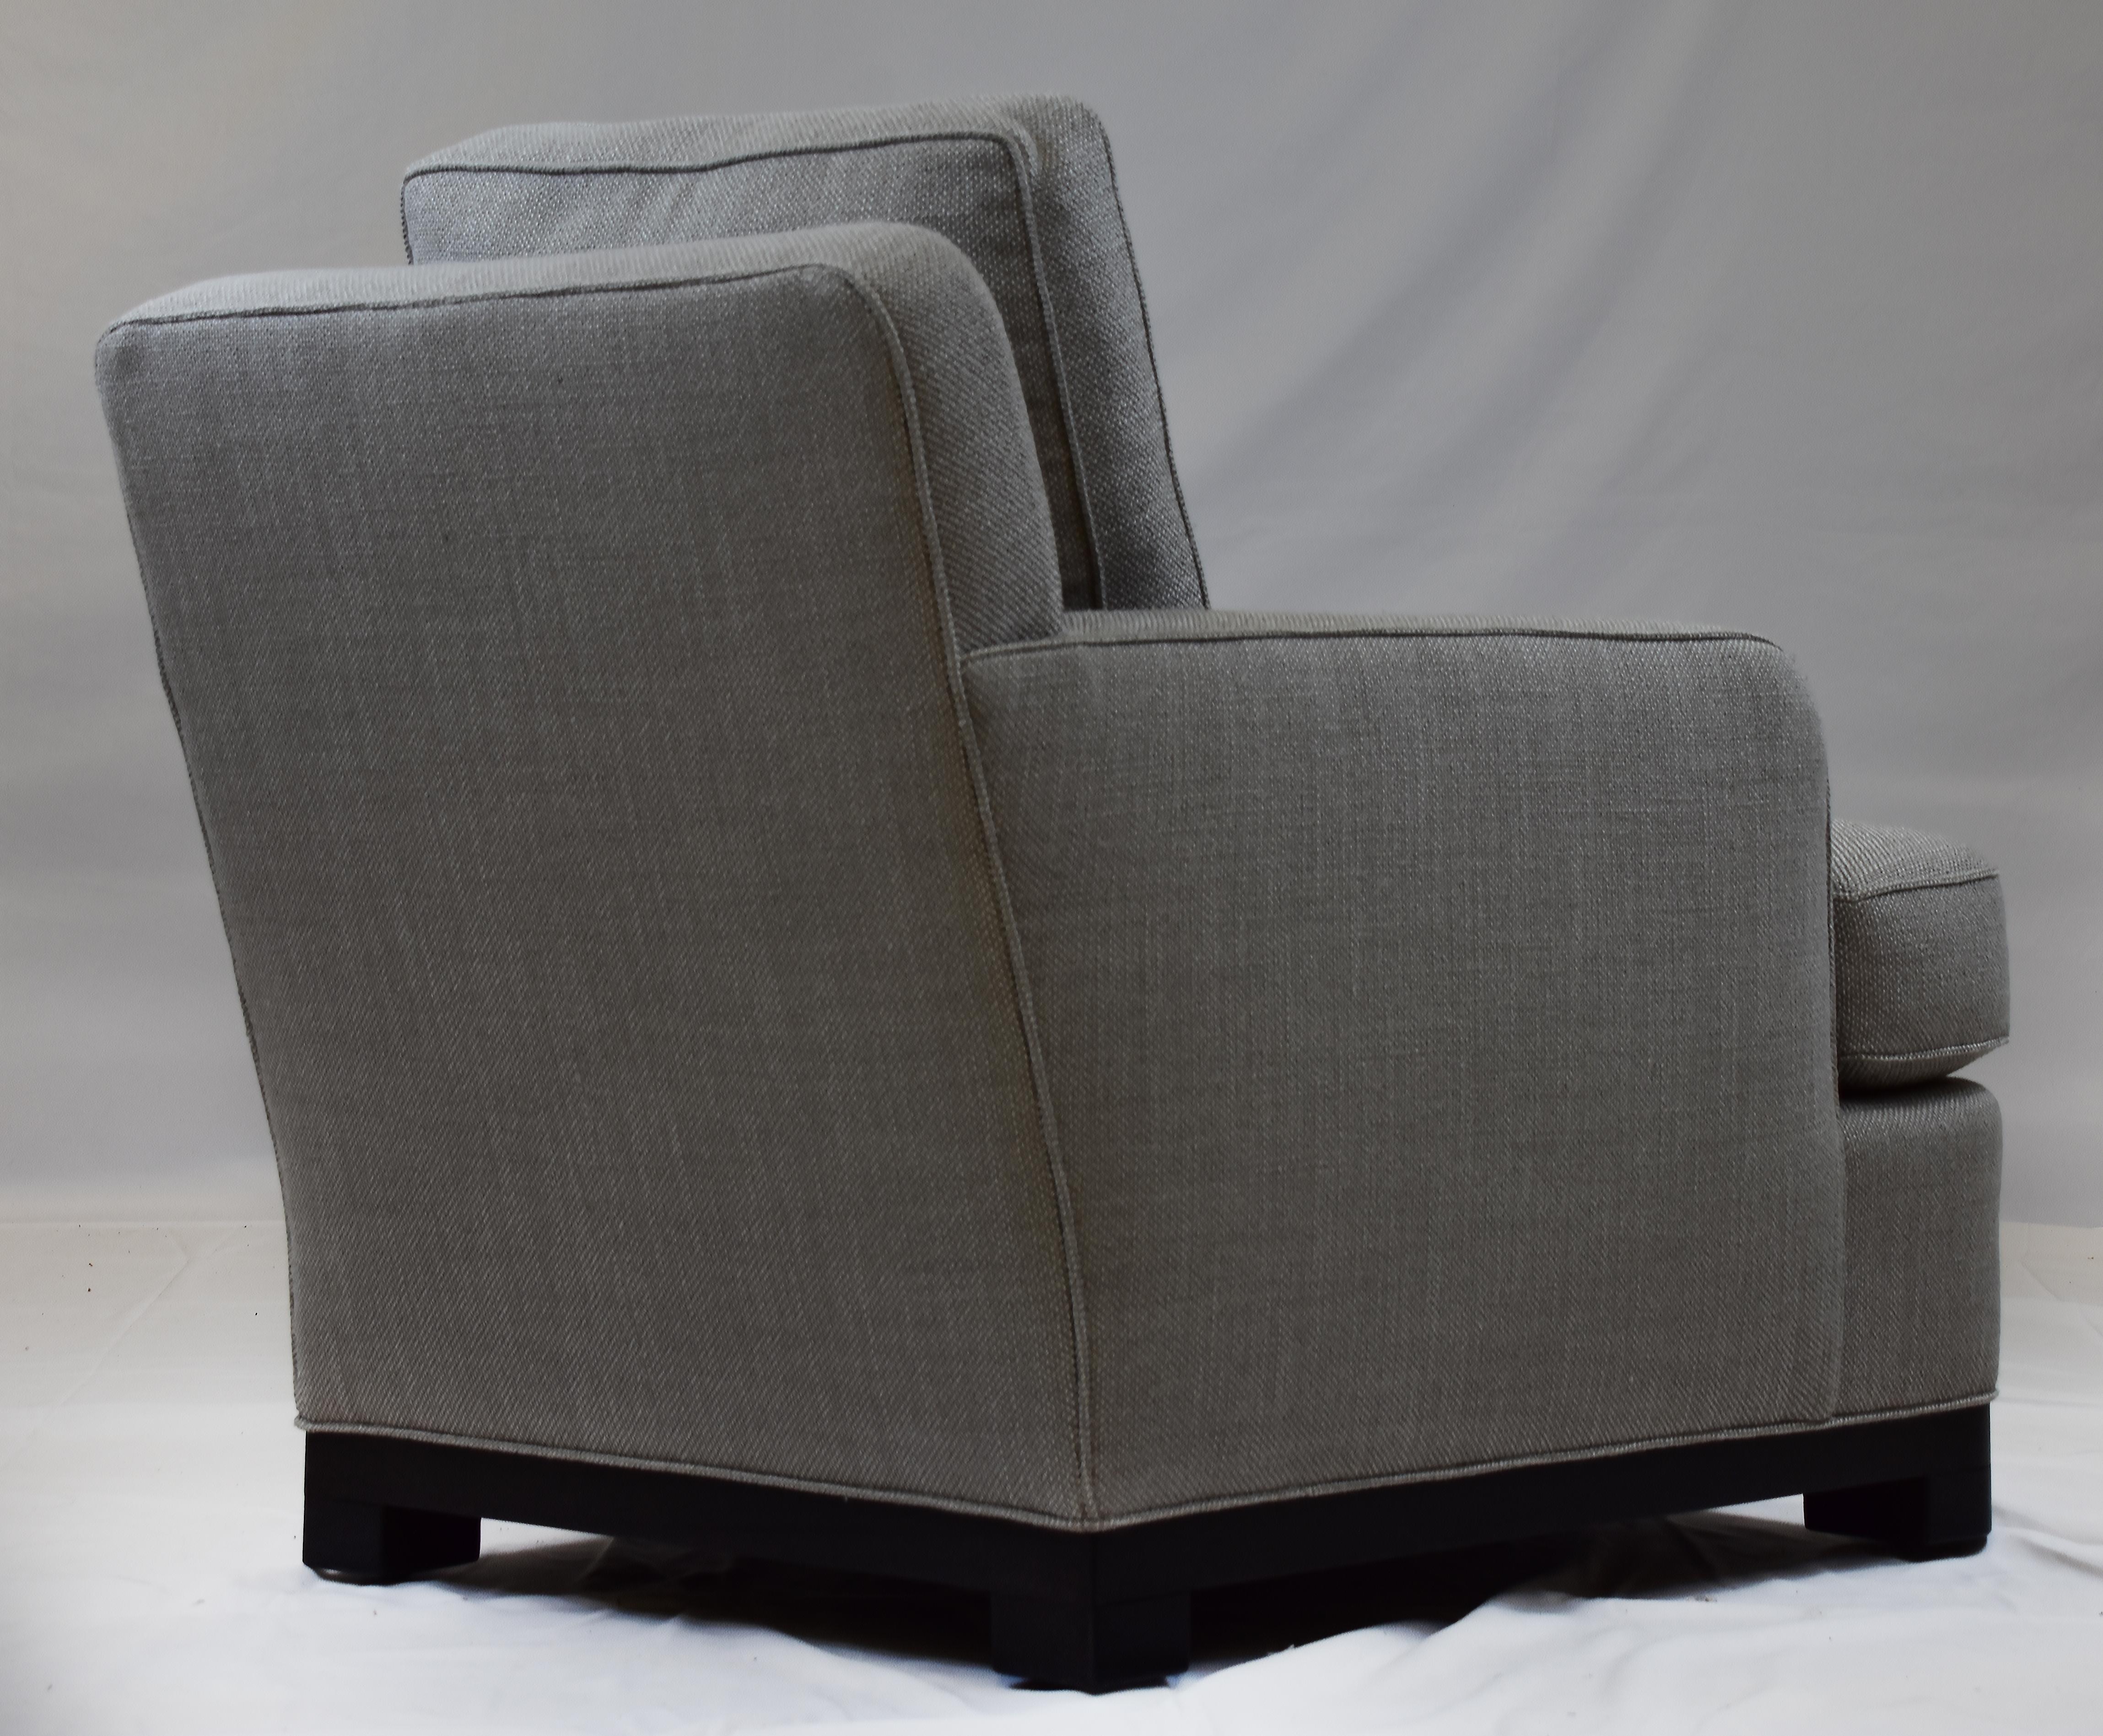 Le Jeune Upholstery Madison Lounge Chair Showroom Model In Good Condition For Sale In Miami, FL